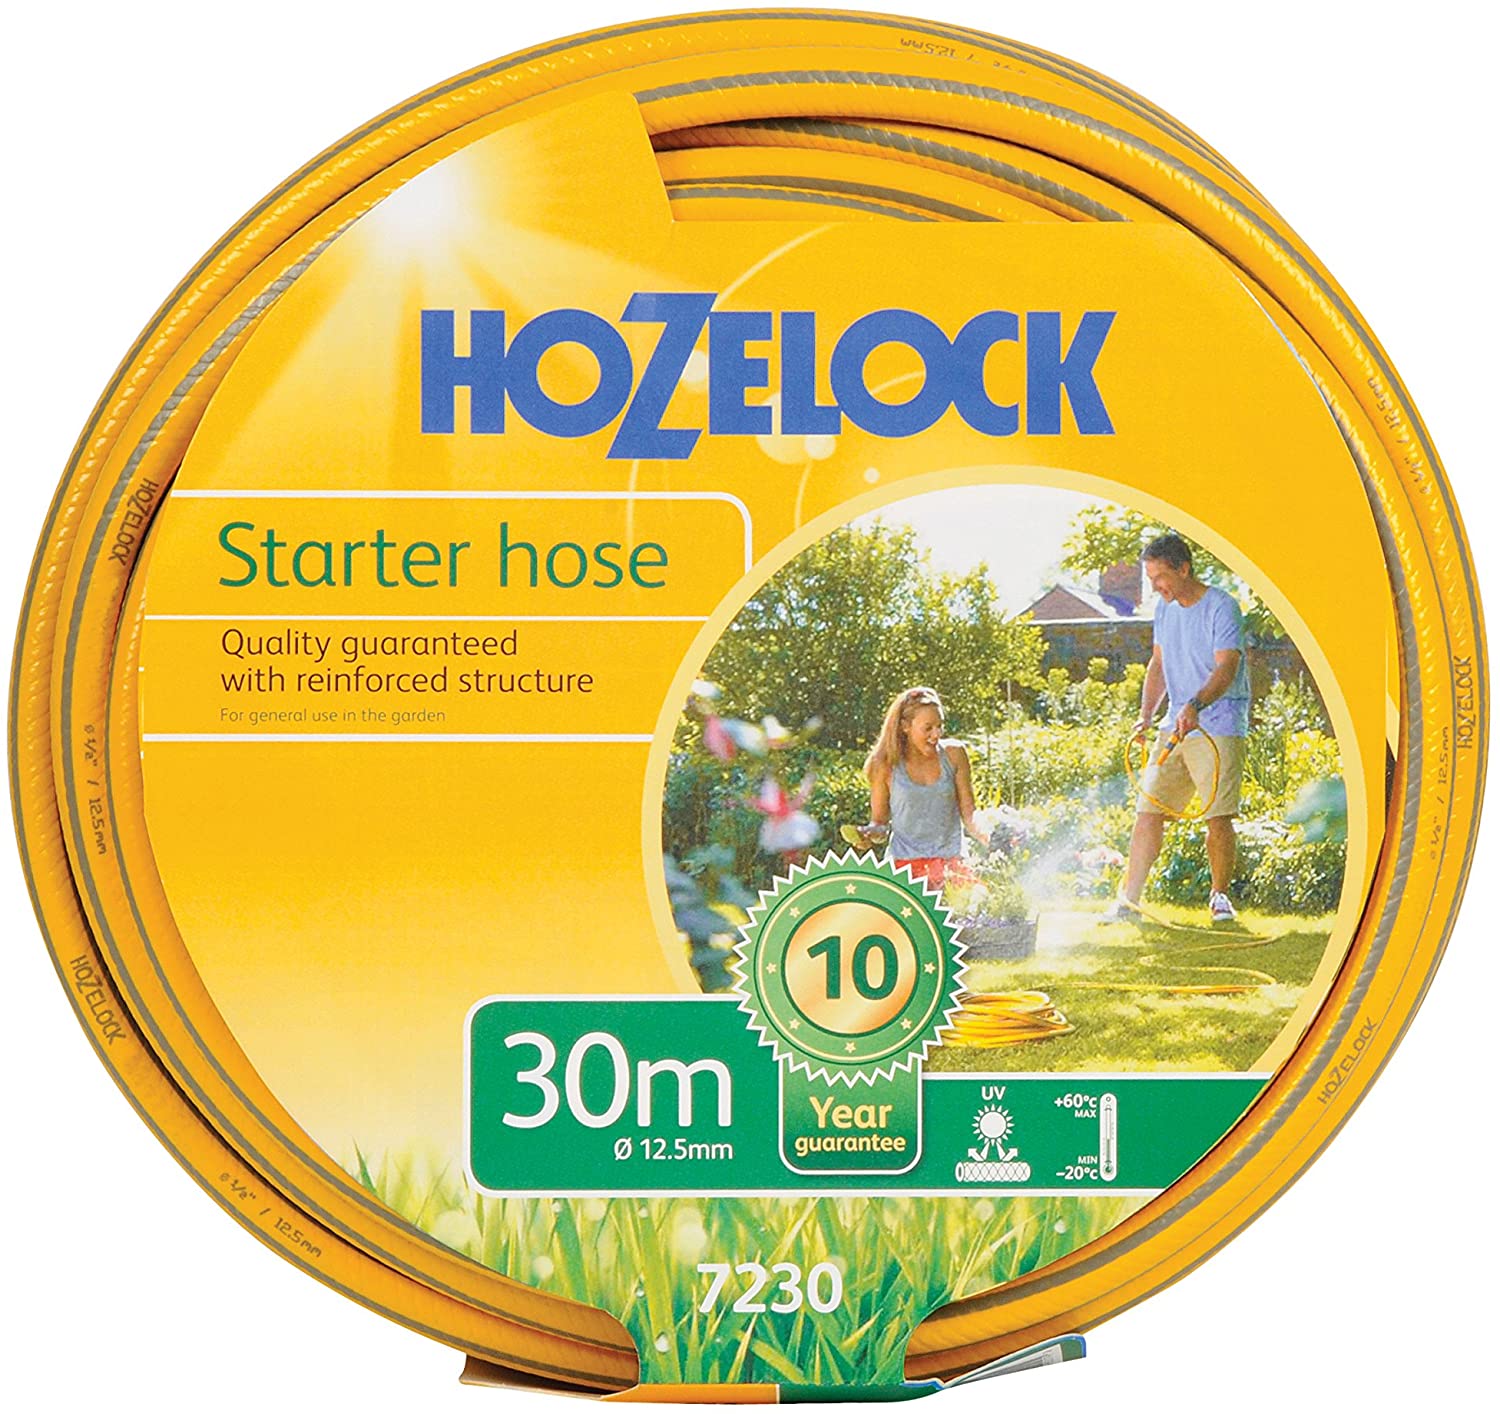 Hozelock Reinforced Starter Hose 30m {7230} Yellow - NWT FM SOLUTIONS - YOUR CATERING WHOLESALER